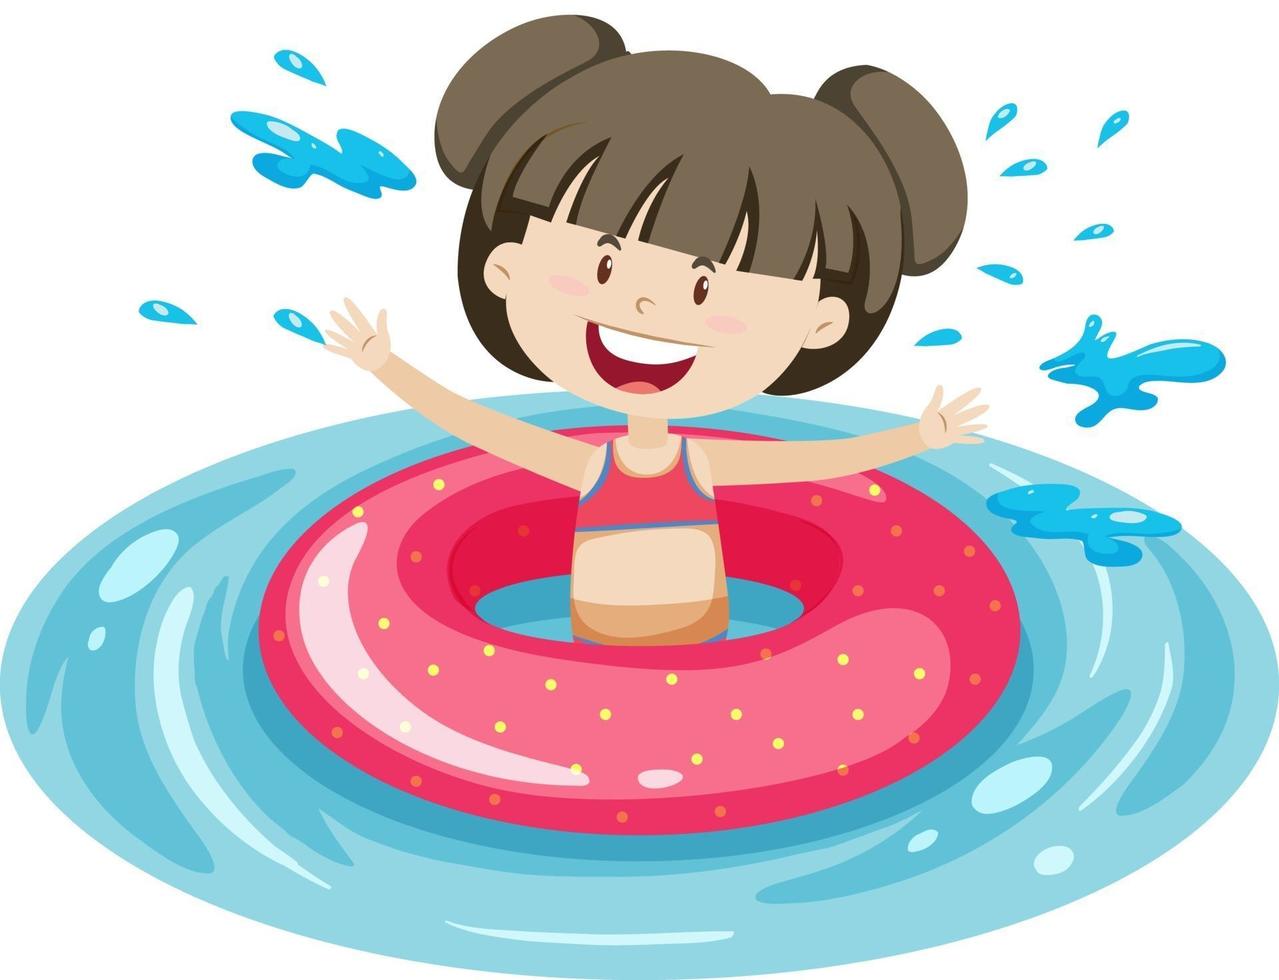 Cute girl with pink swimming ring in the water isolated vector